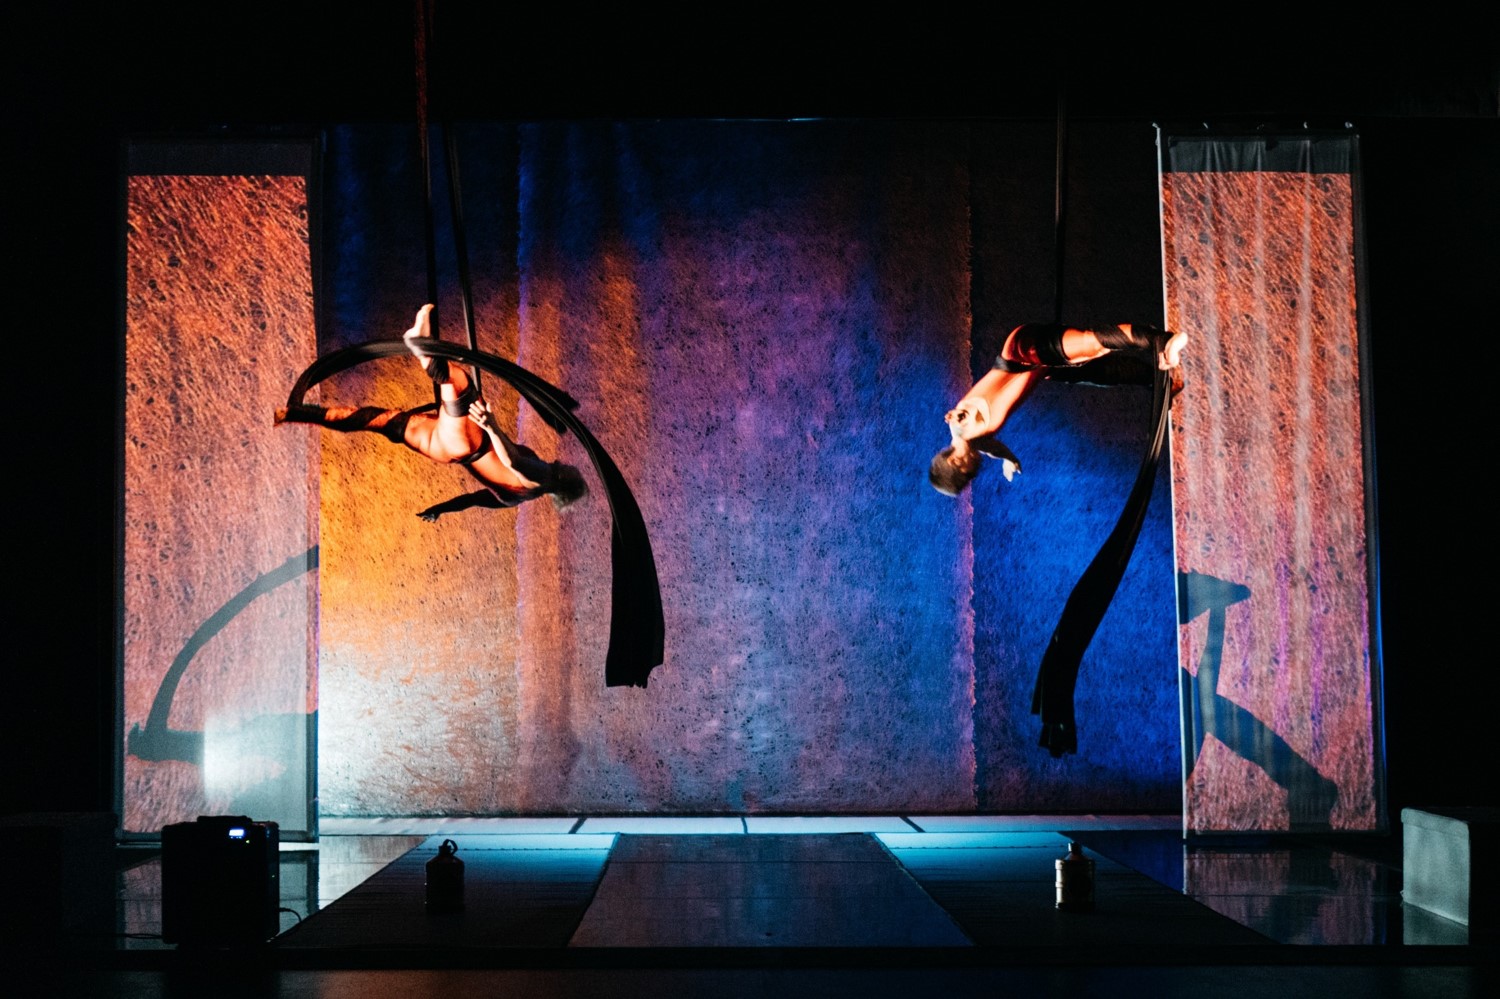 Flight Paths - A wide landscape shot of two women on aerial silks, tumbling through the air mid fall amongst a sea of orange and blue stage lighting.